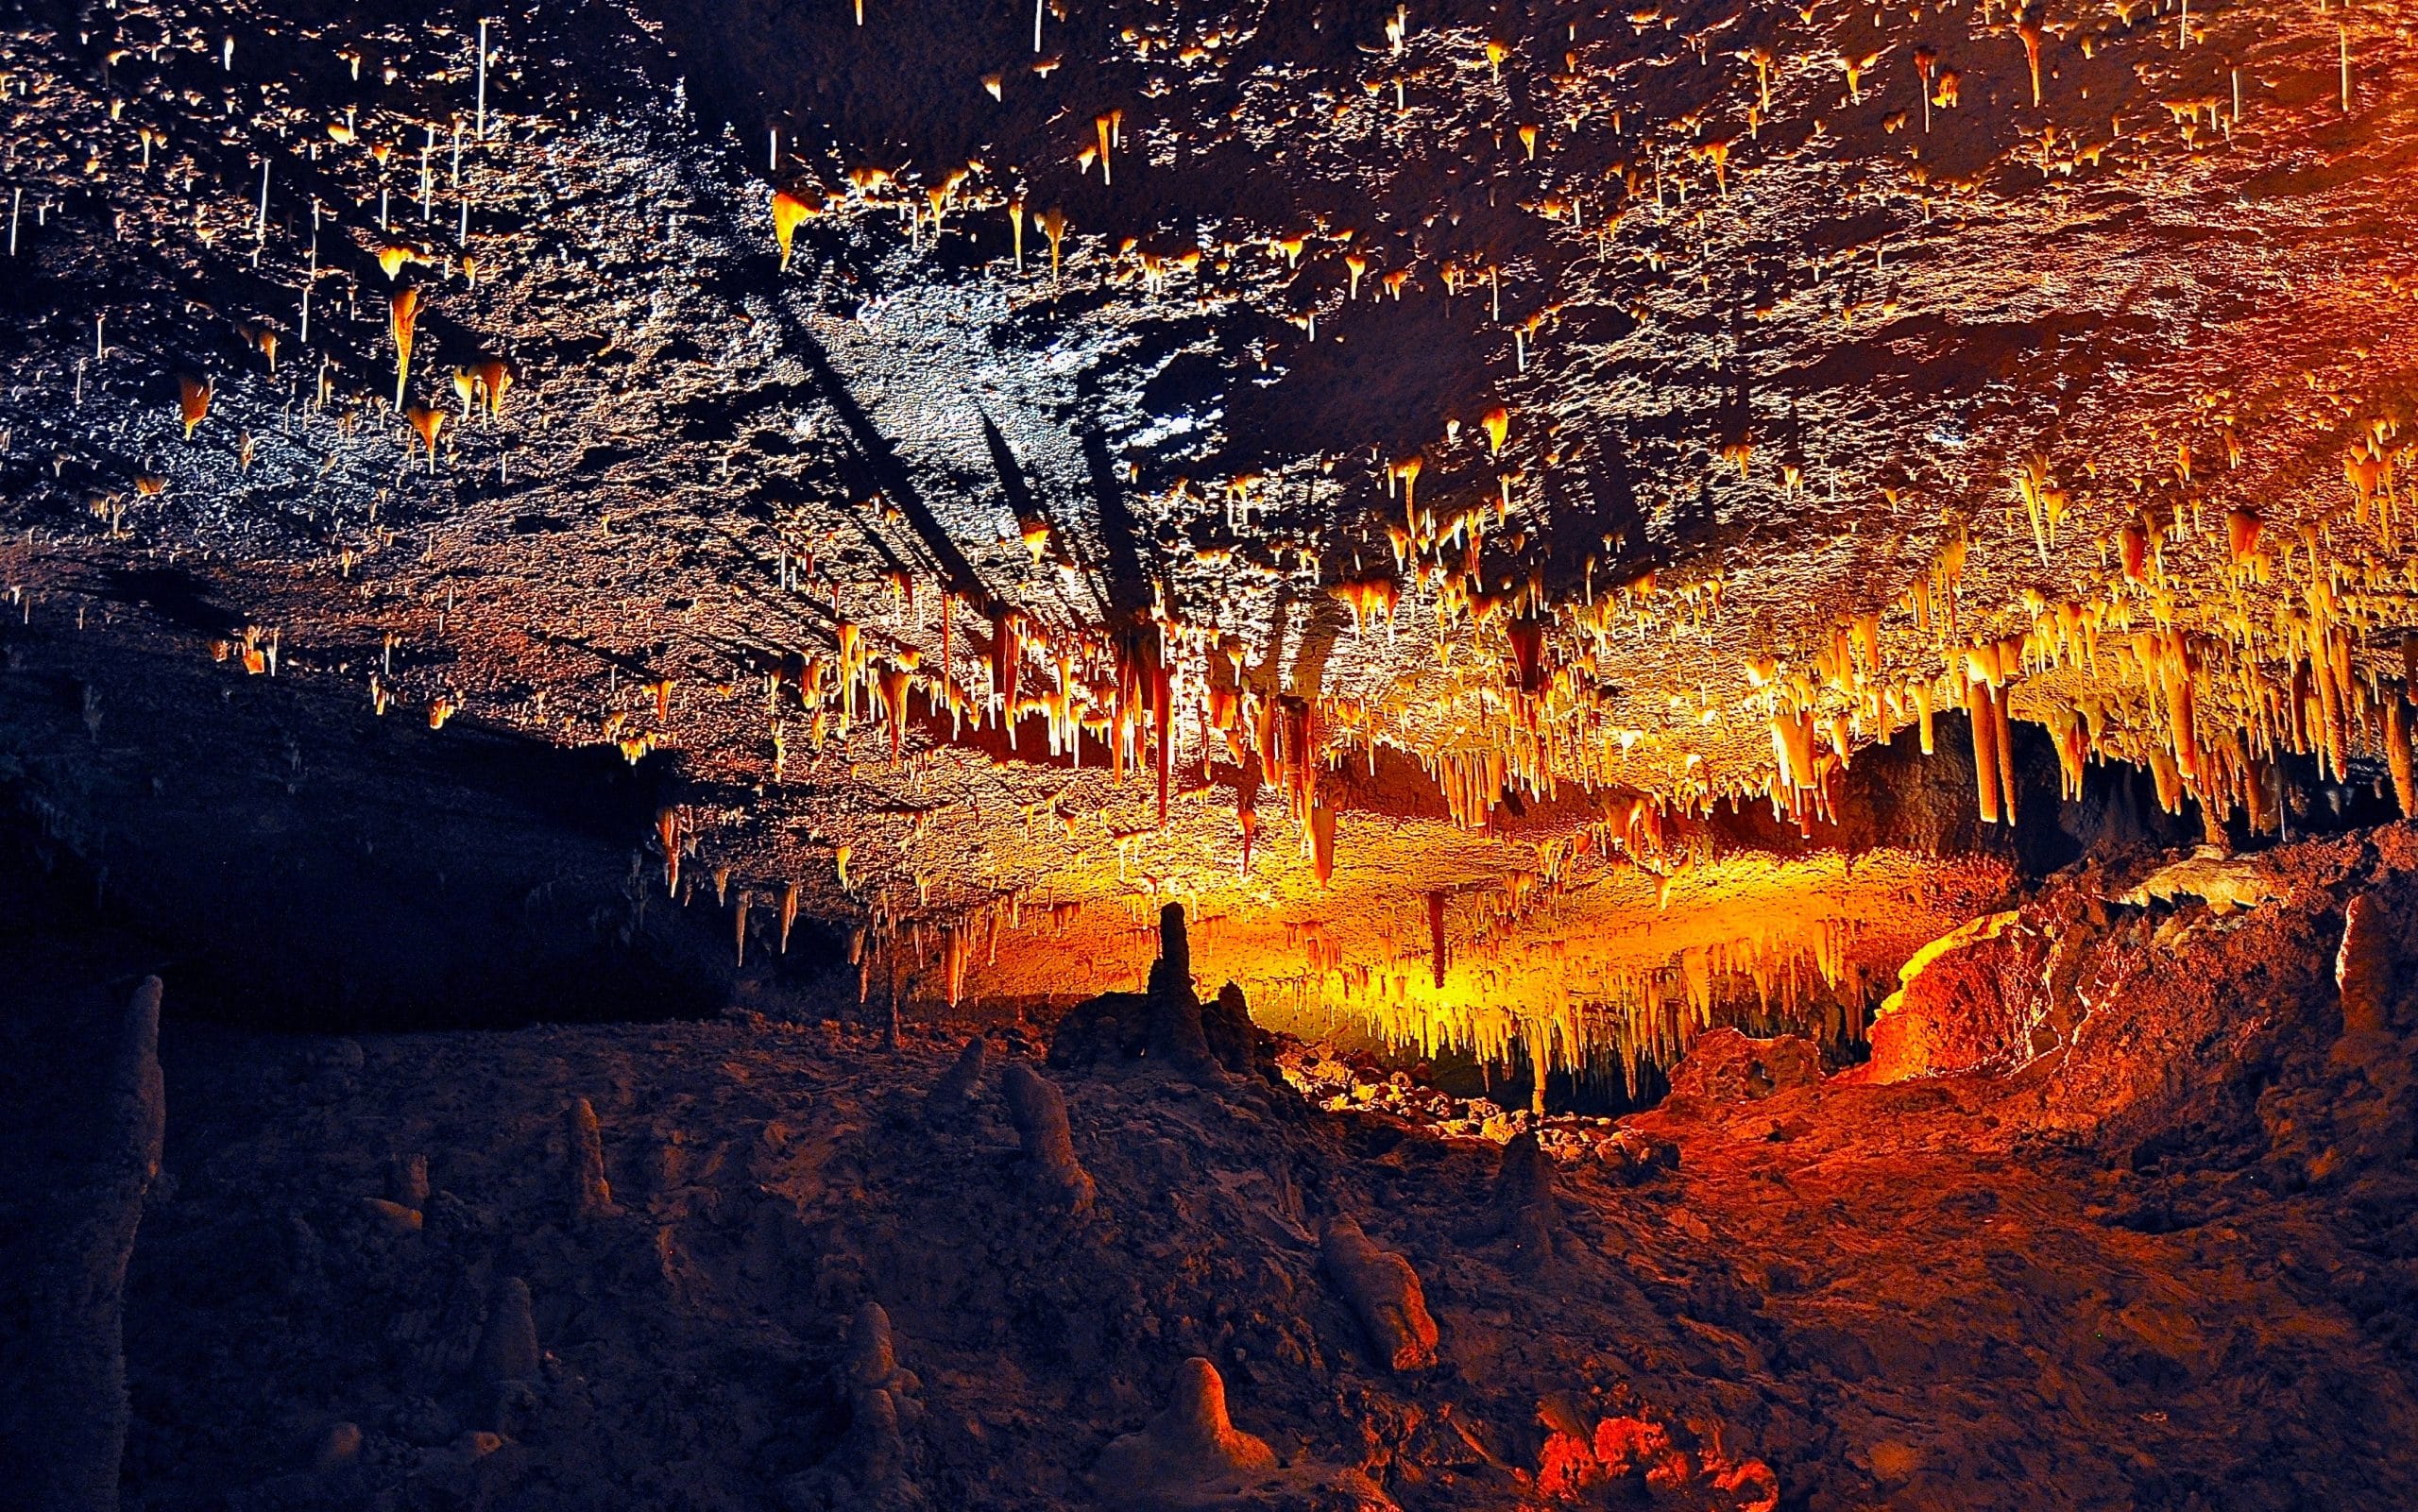 An image of stalagmite and stalactites inside a cave